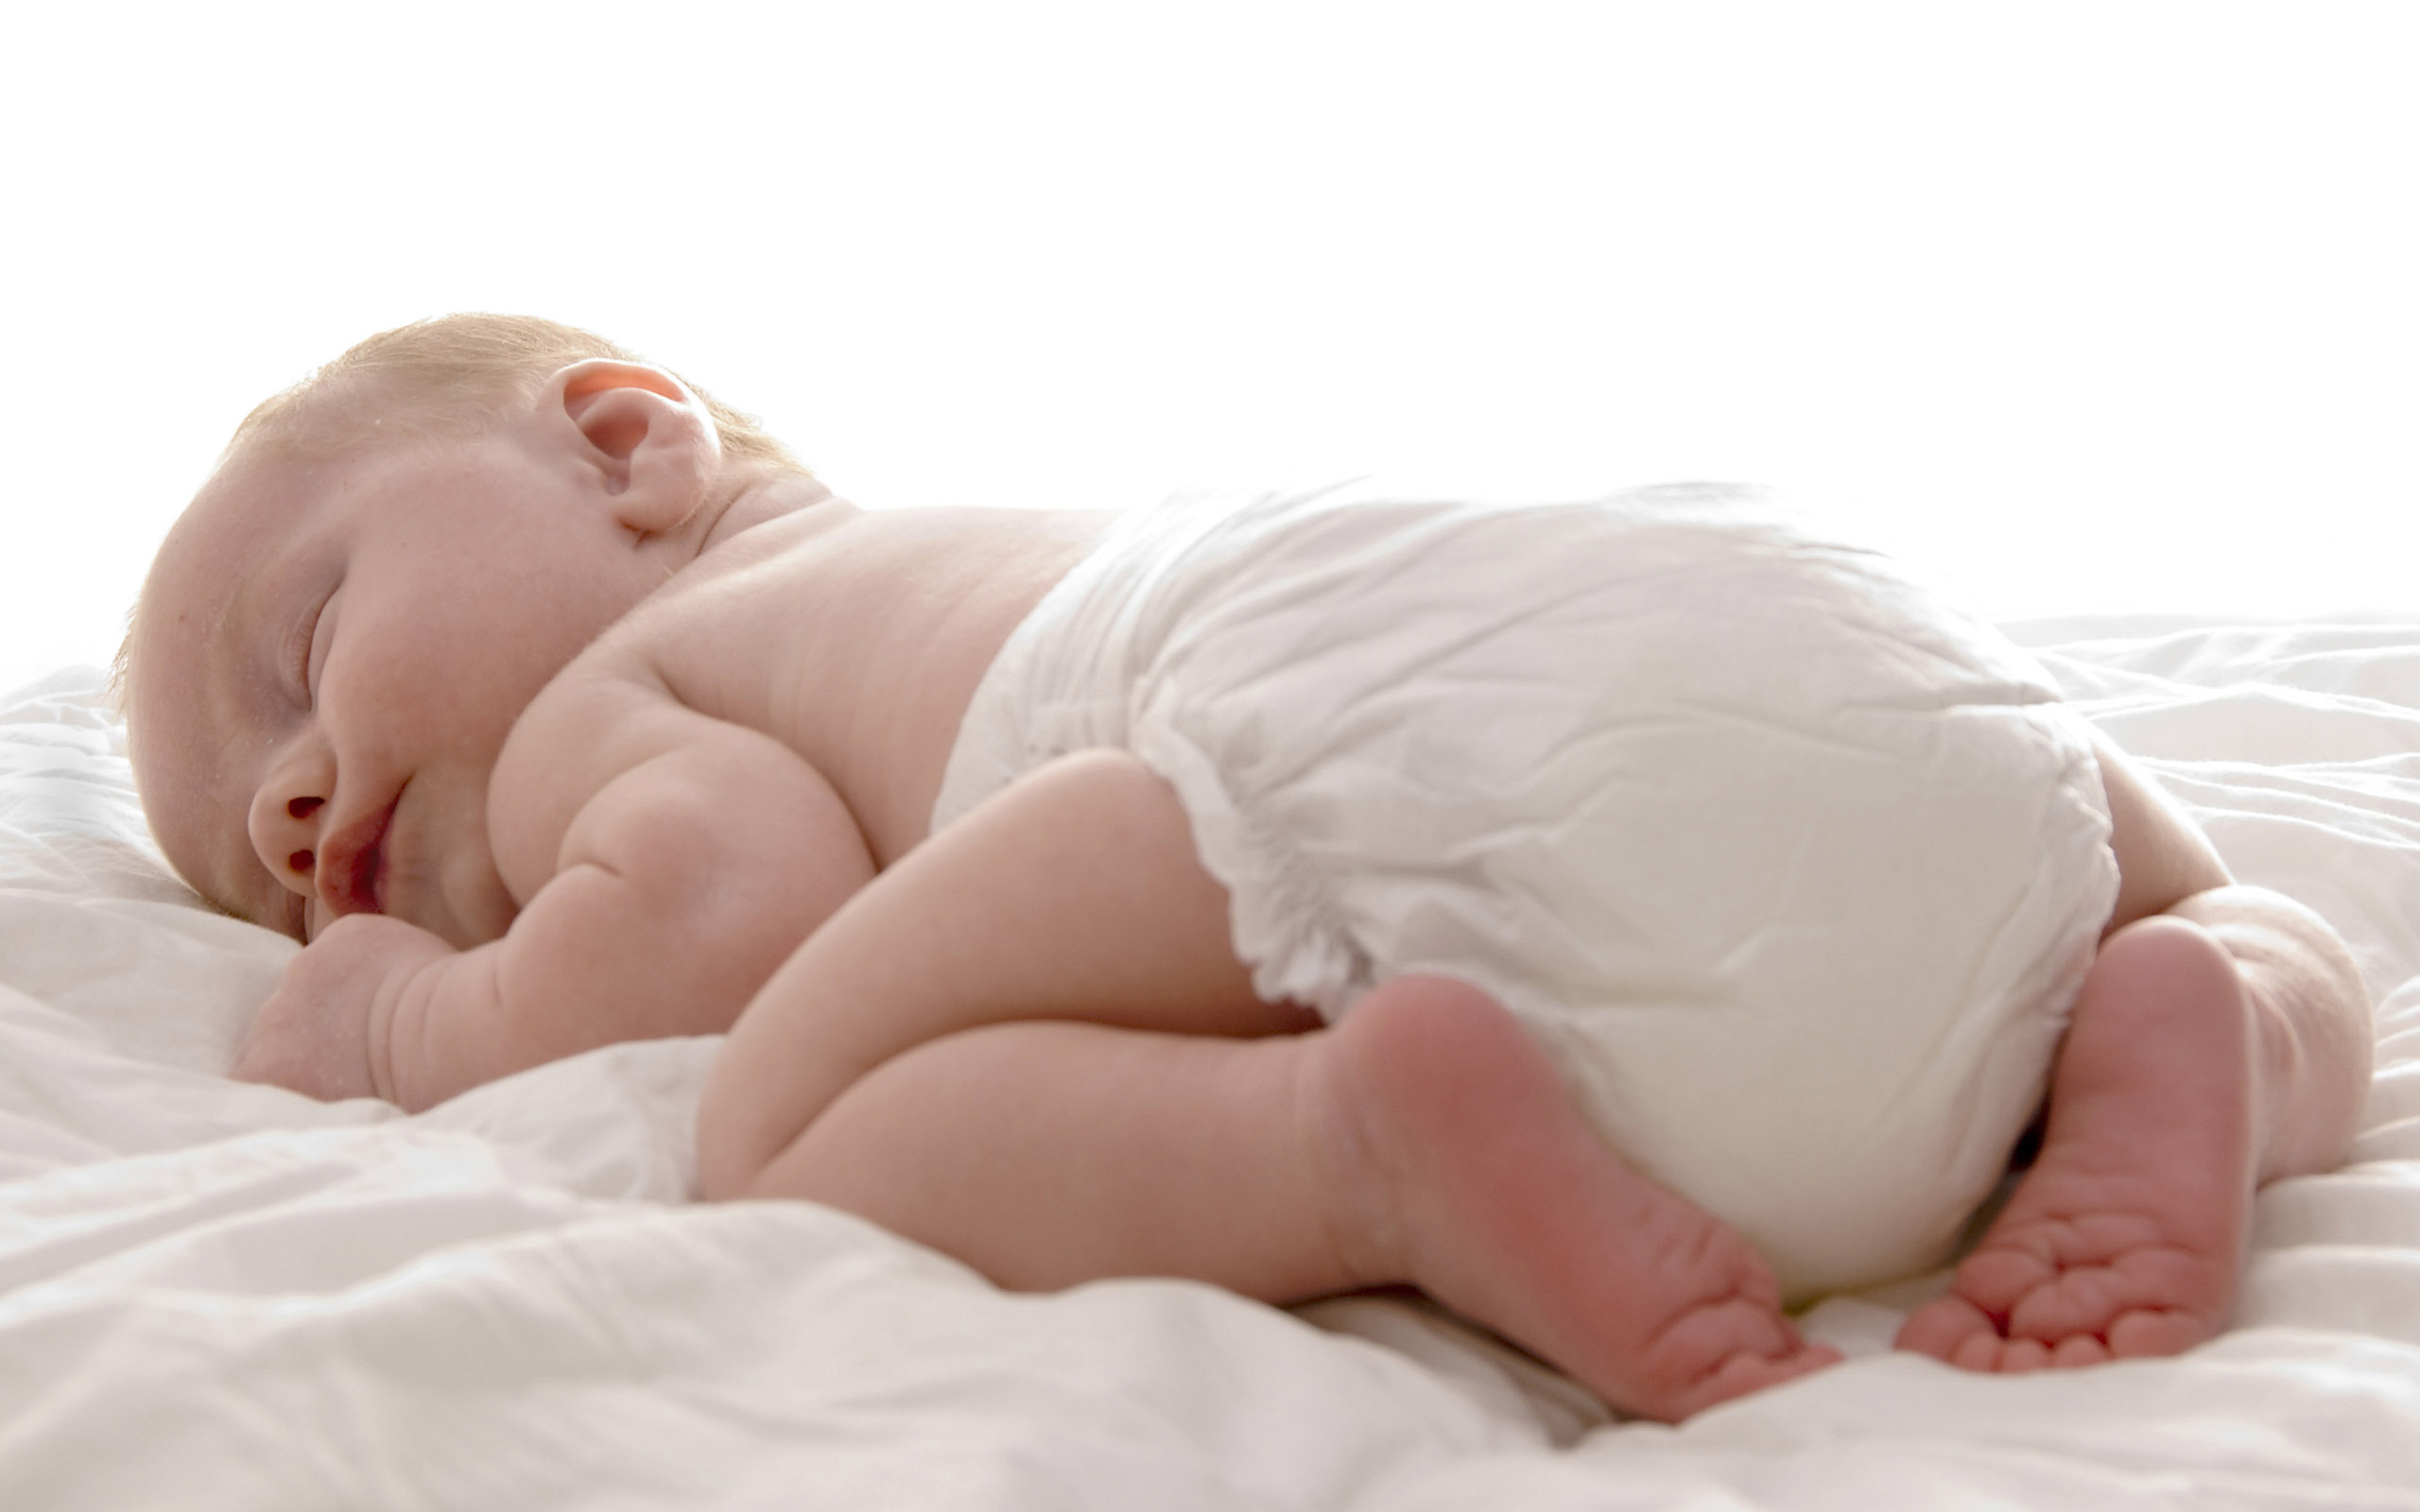 Sleeping Baby Wallpaper Cute With Toy Eat On